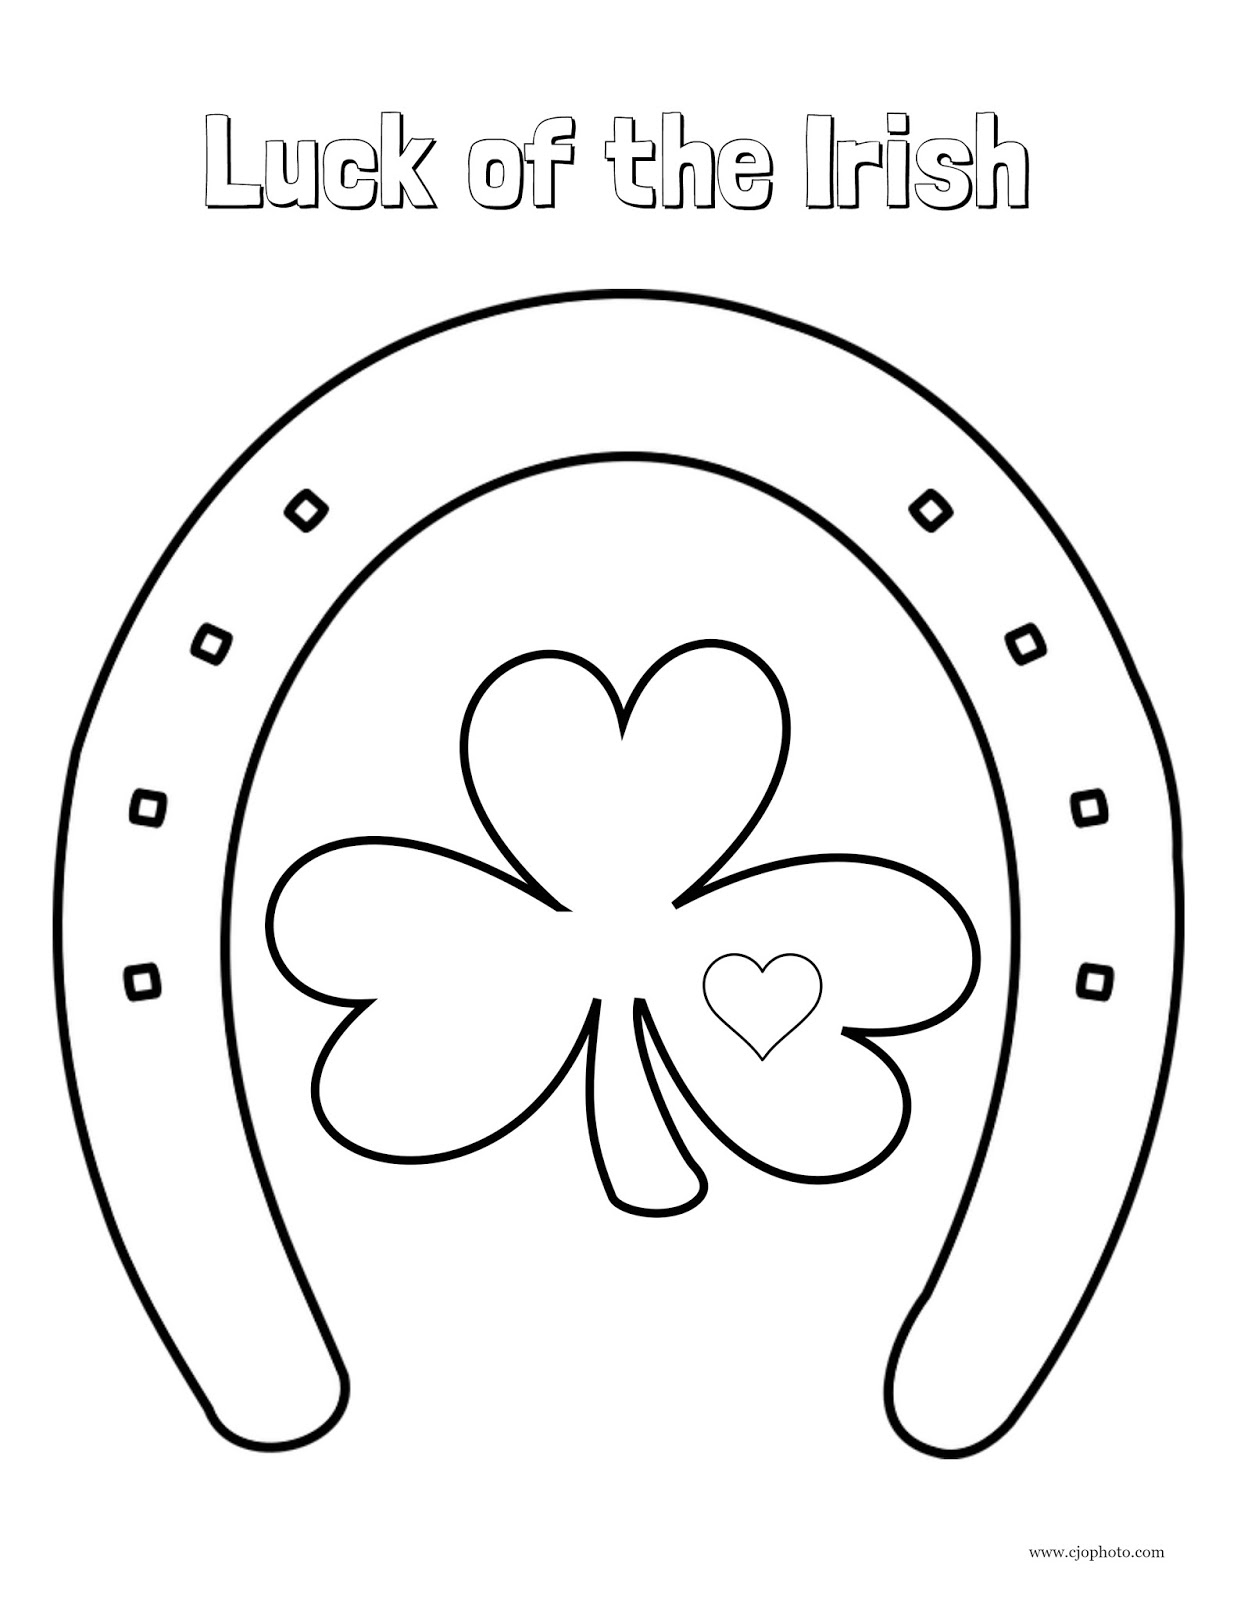 Cjo photo st patricks day coloring page luck of the irish